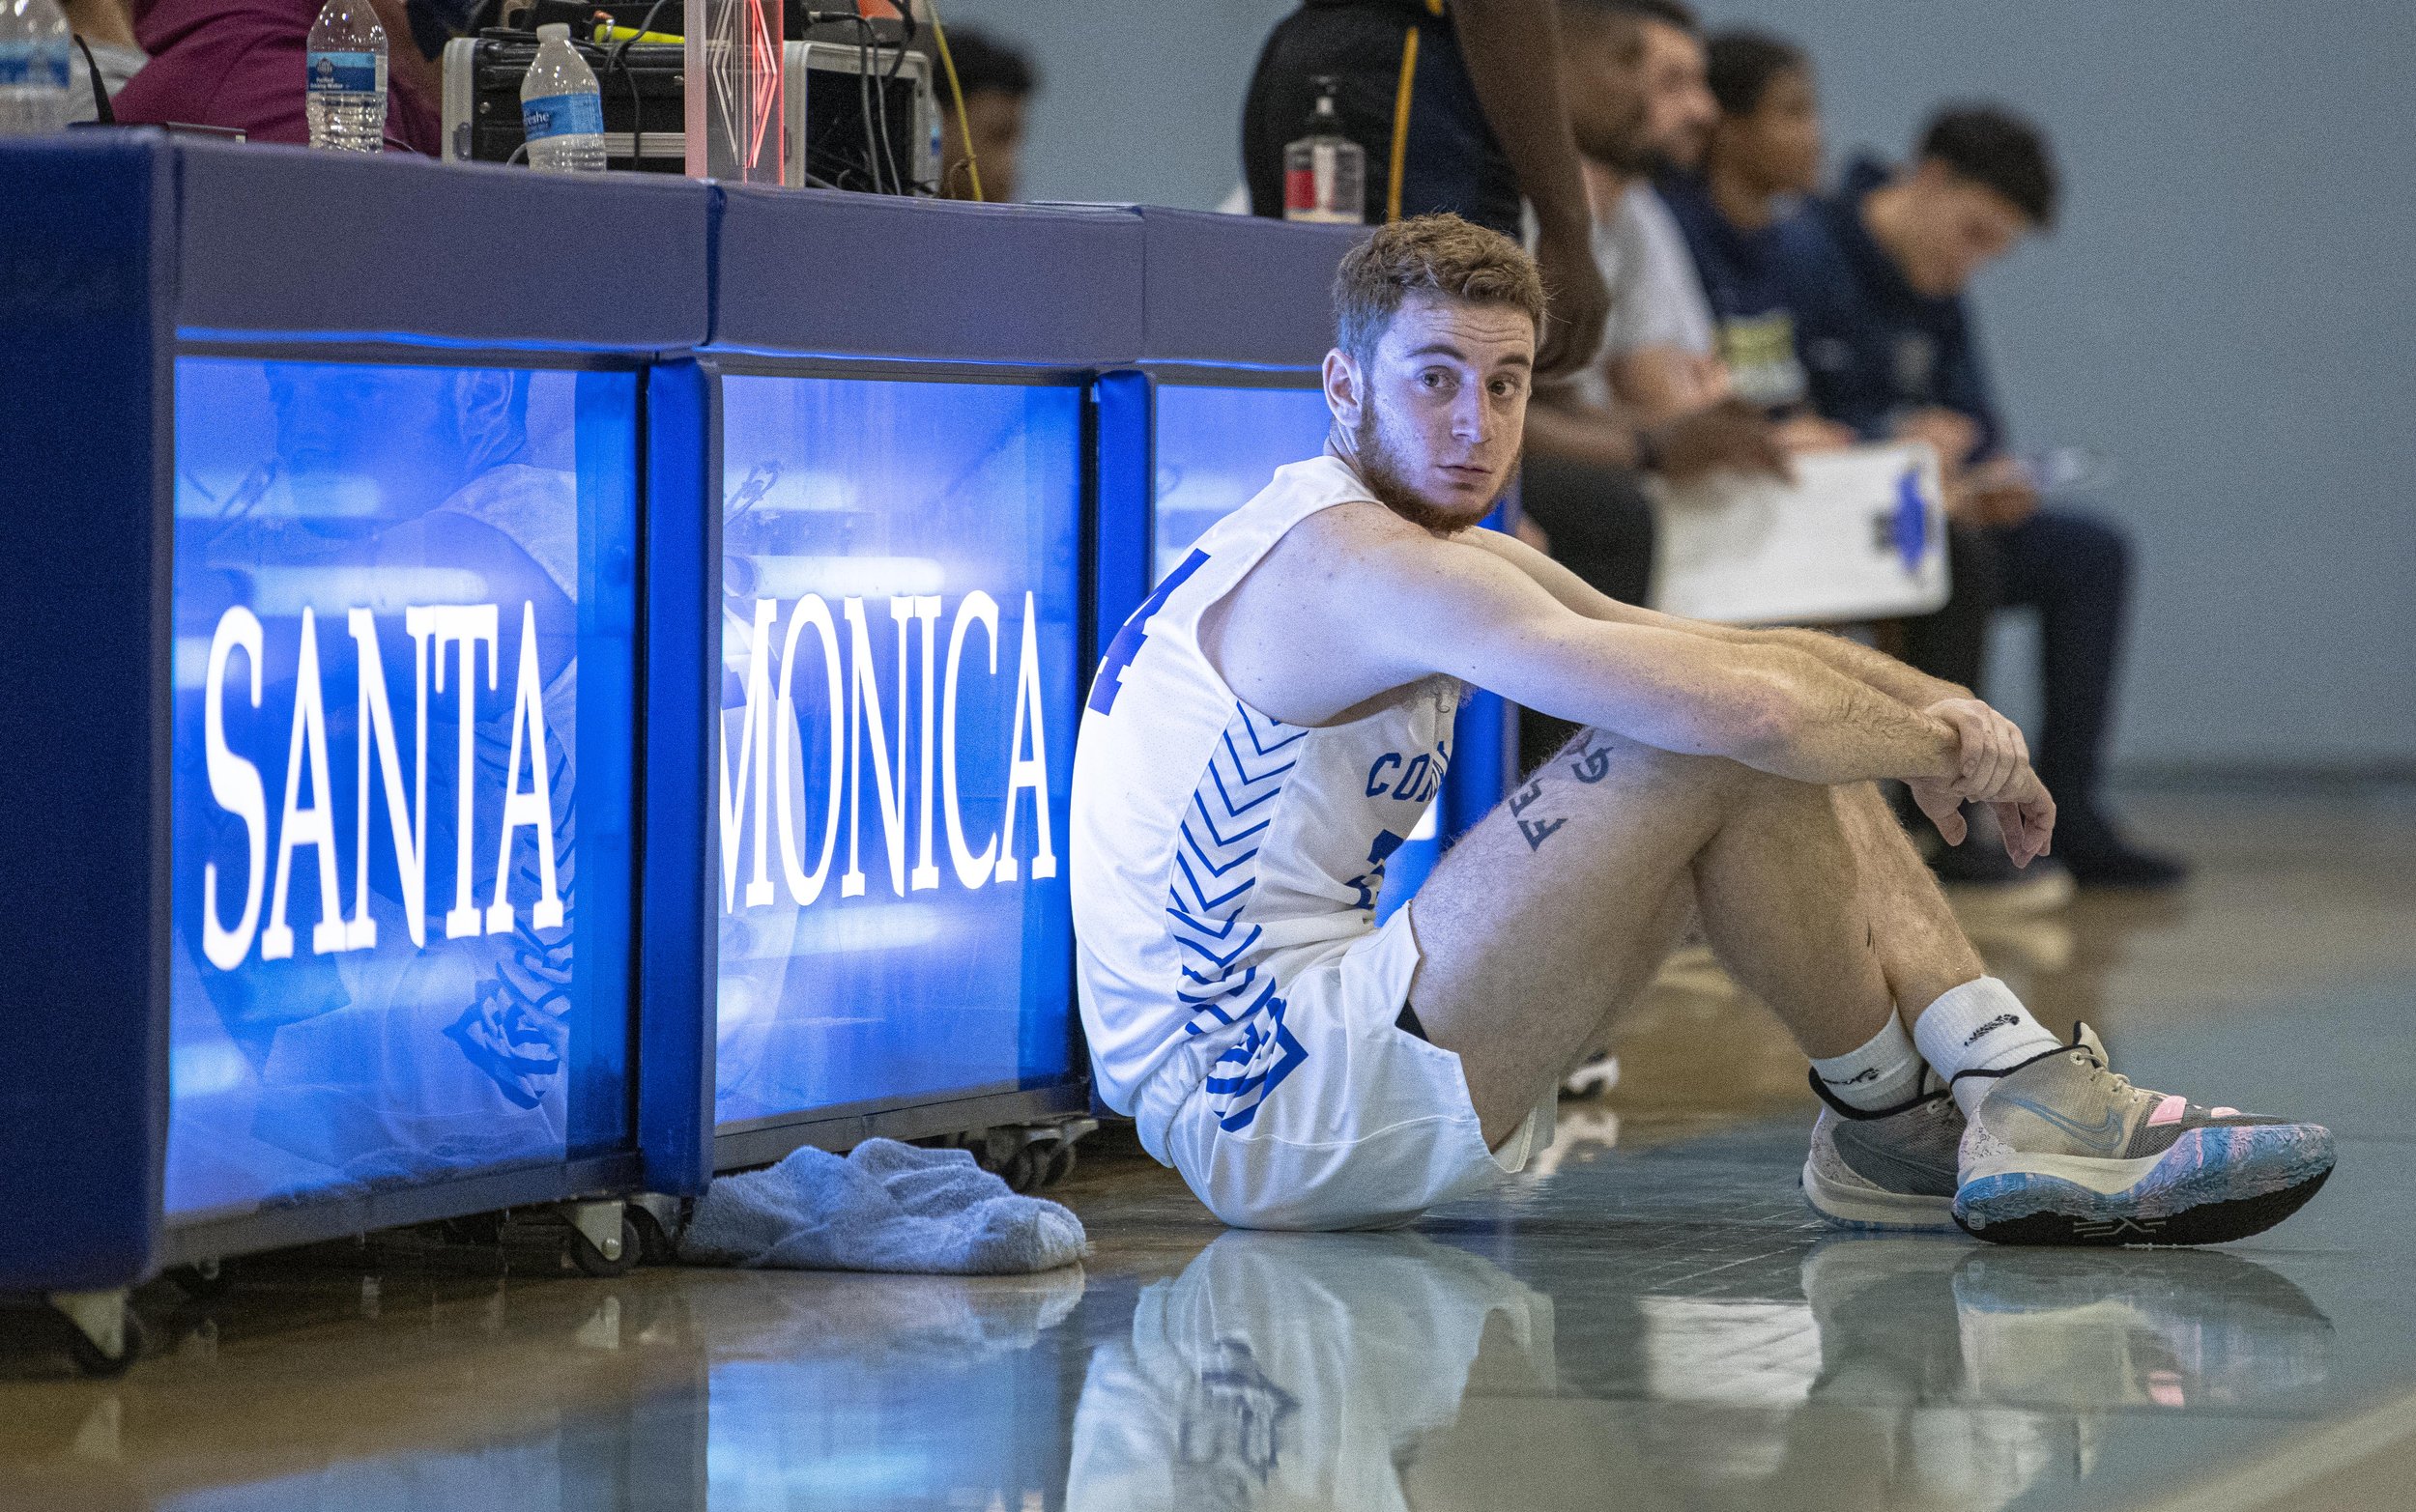  Santa Monica College Corsairs freshman Alex Villi (24) waits to be subbed into the game as Cypress College closes in on the Corsairs lead. (Jon Putman | The Corsair) 